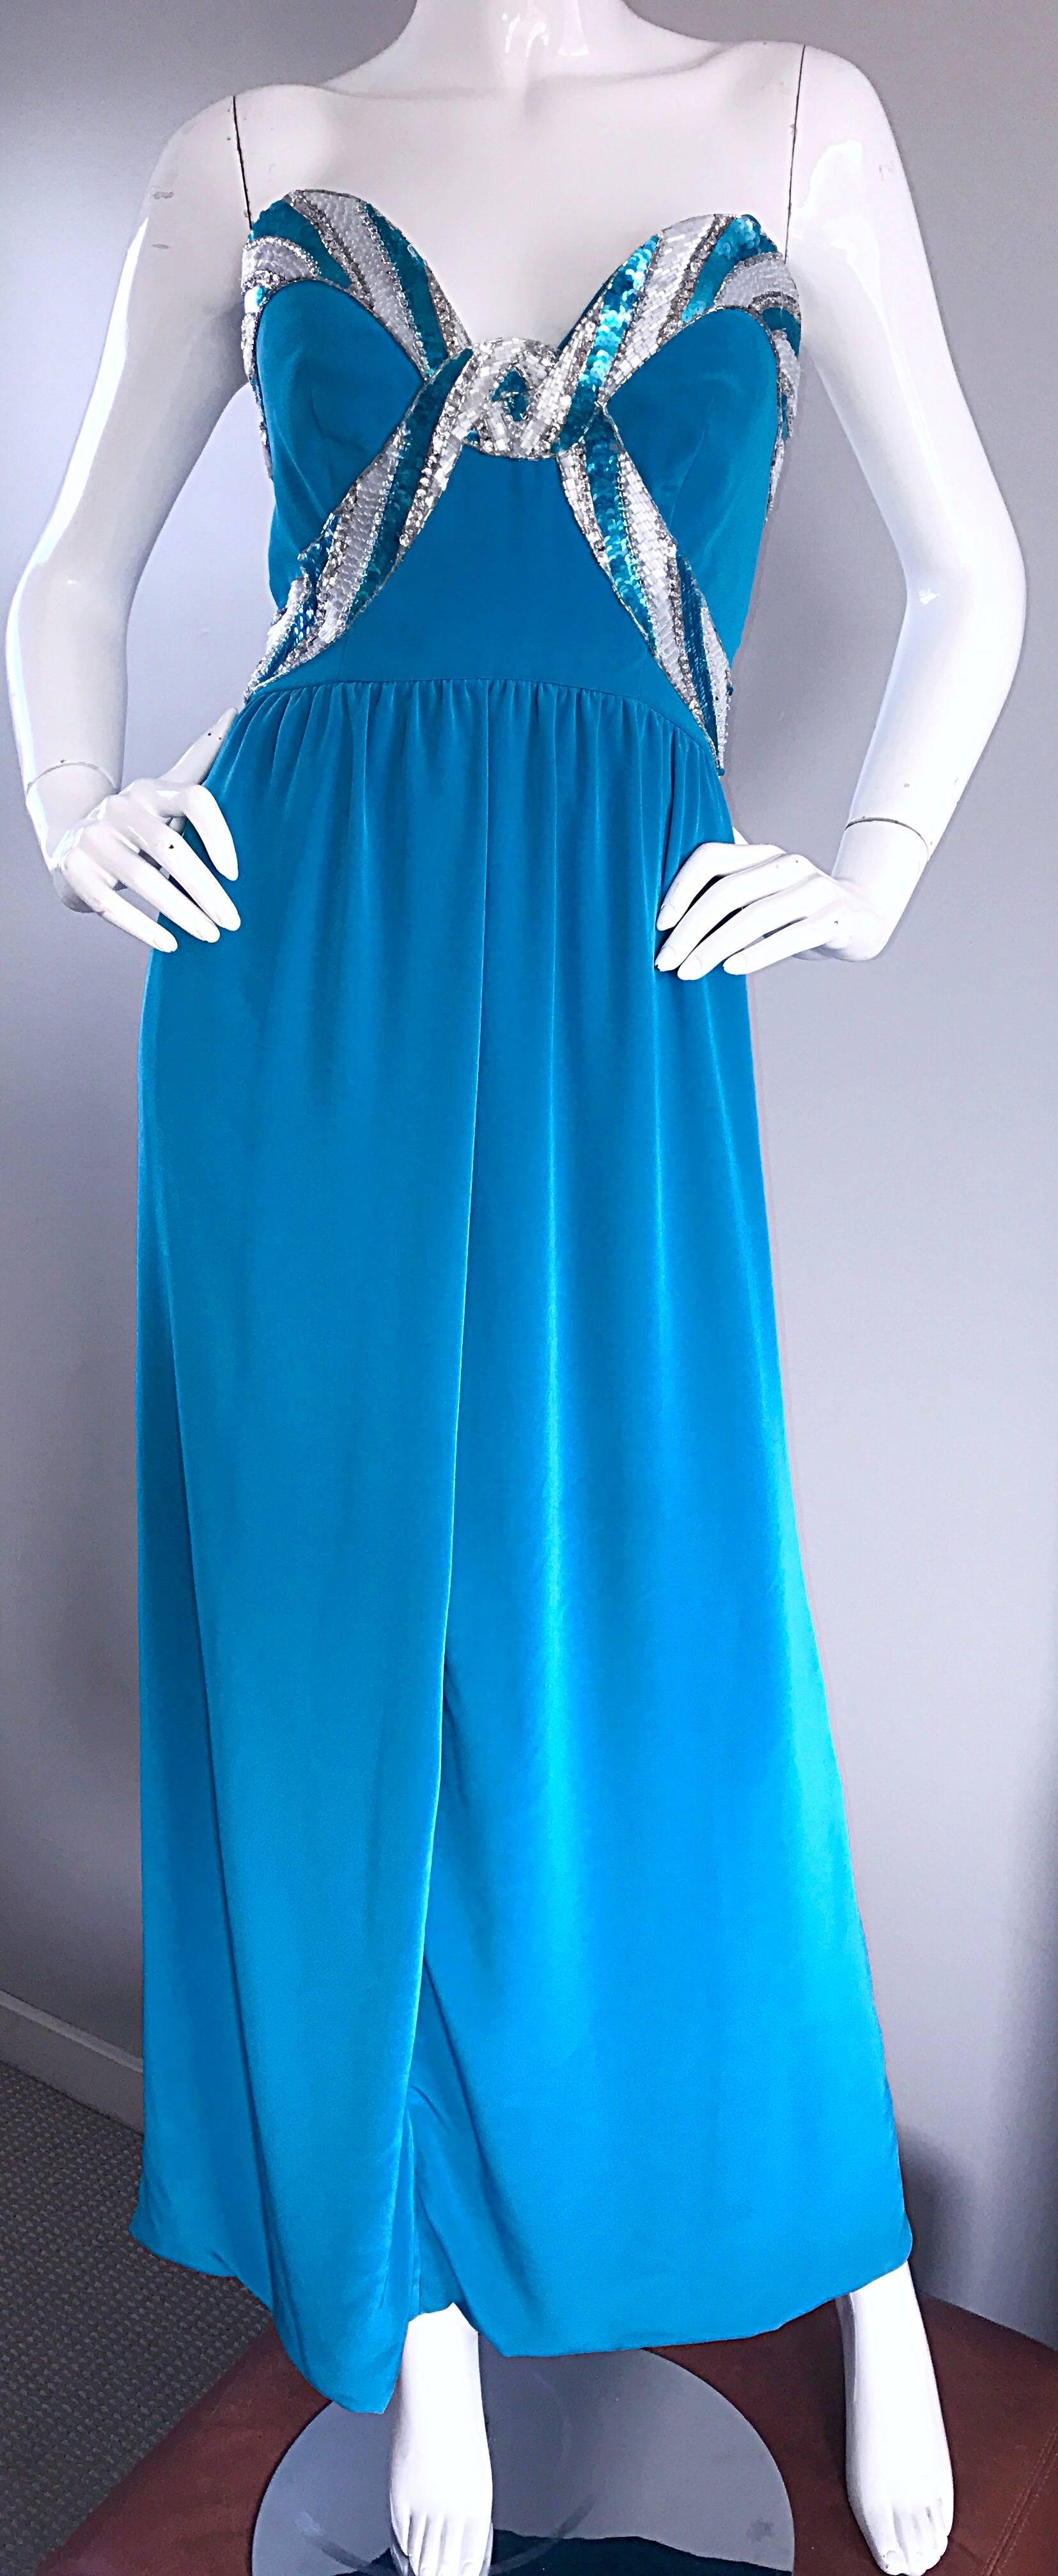 Bob Mackie Vintage Turquoise Teal Blue Sequin Sz 4 Strapless Gown Evening Dress In Excellent Condition For Sale In San Diego, CA